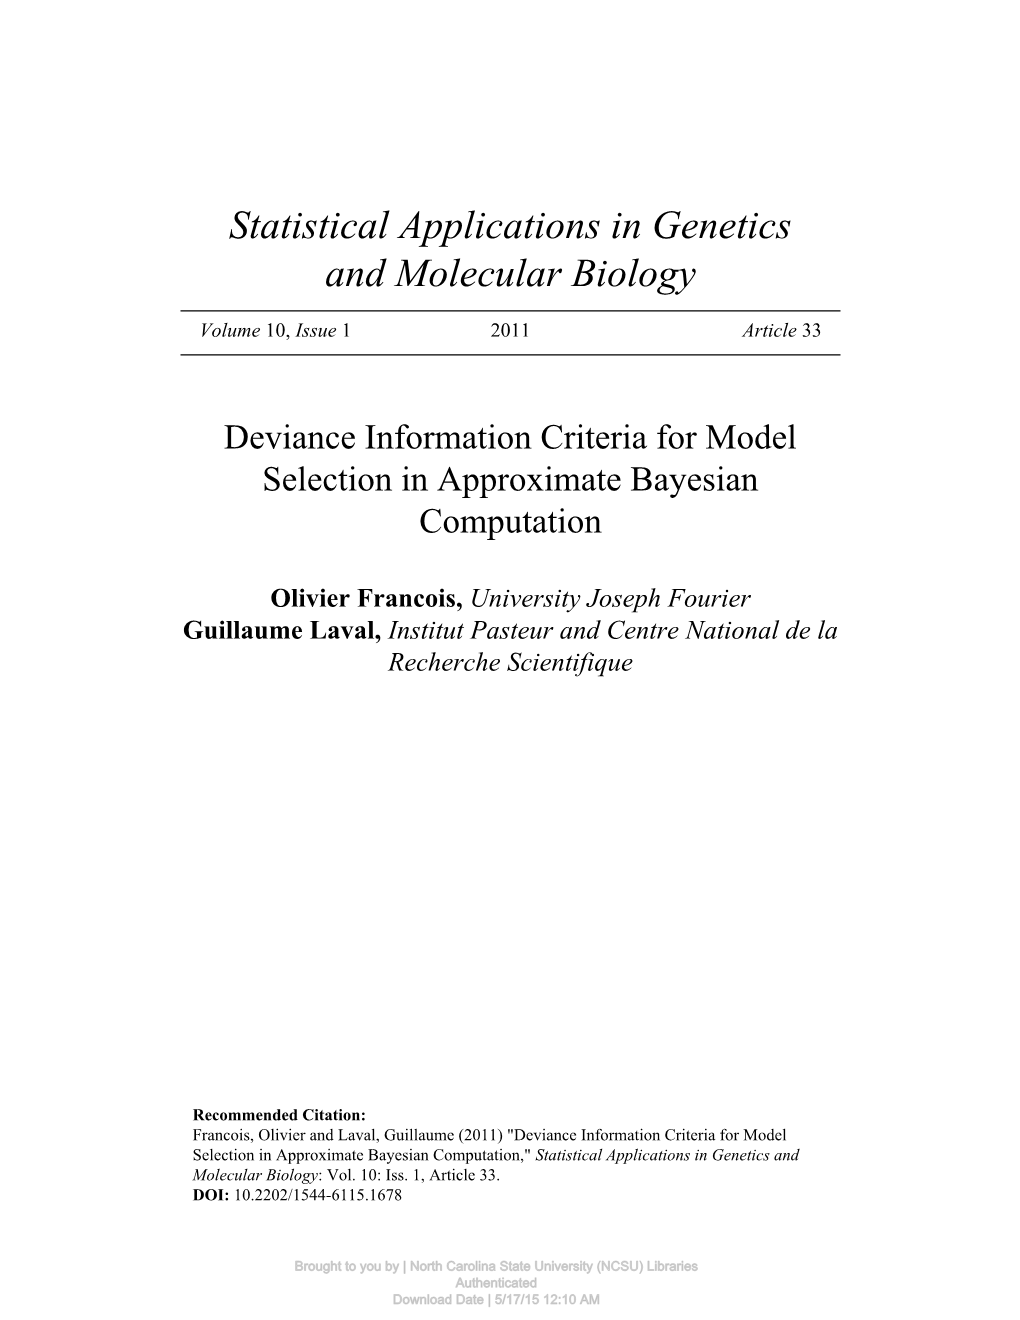 Deviance Information Criteria for Model Selection in Approximate Bayesian Computation